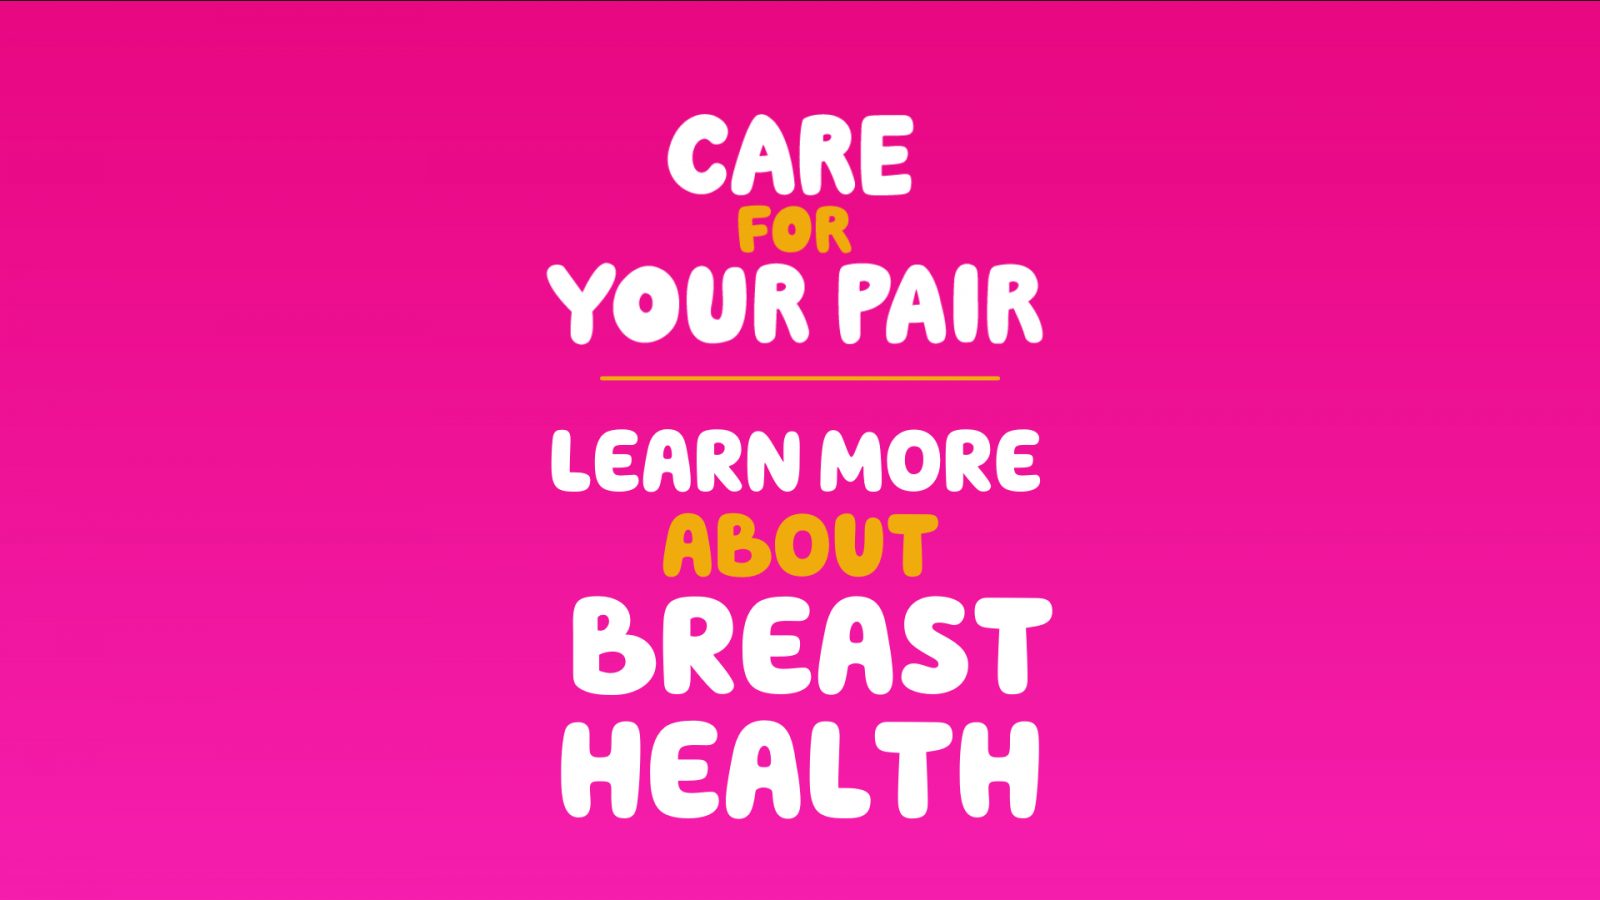 Learn more about breast health